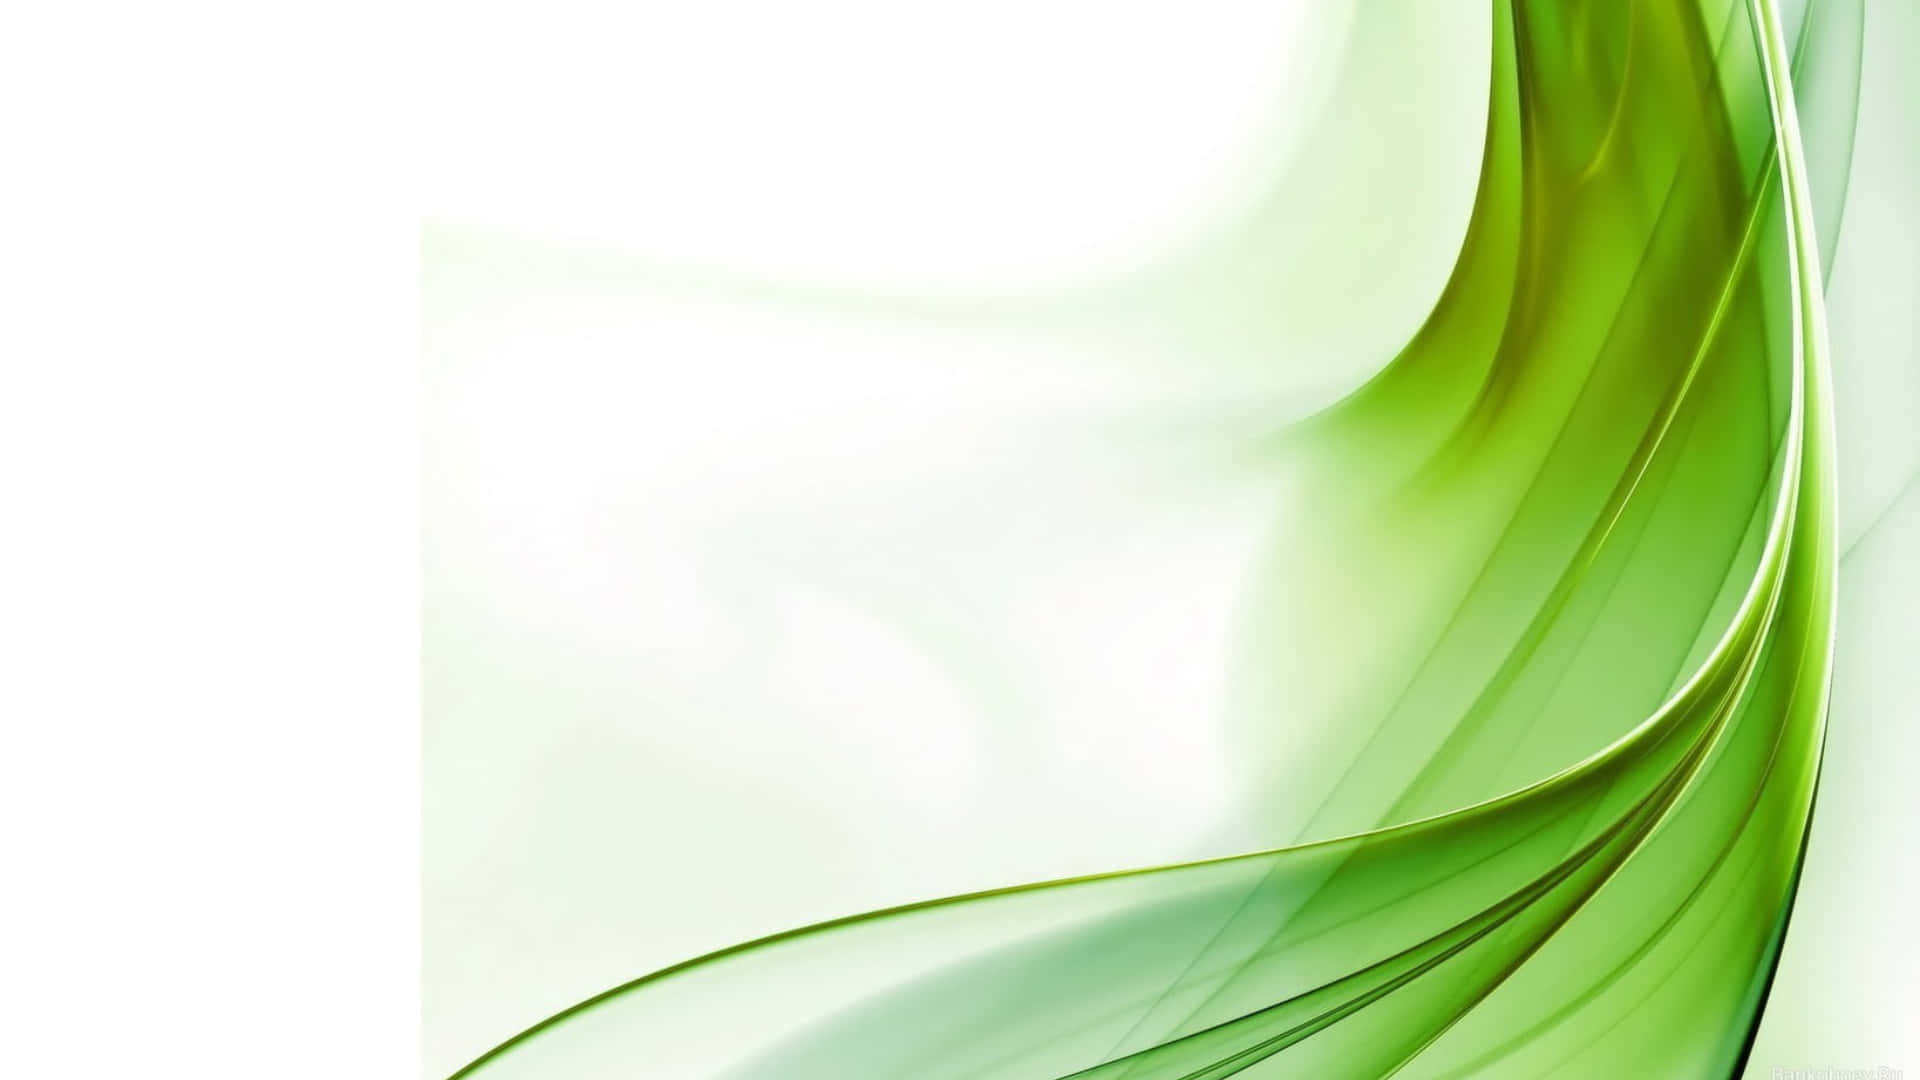 A vivid Green and White abstract background.